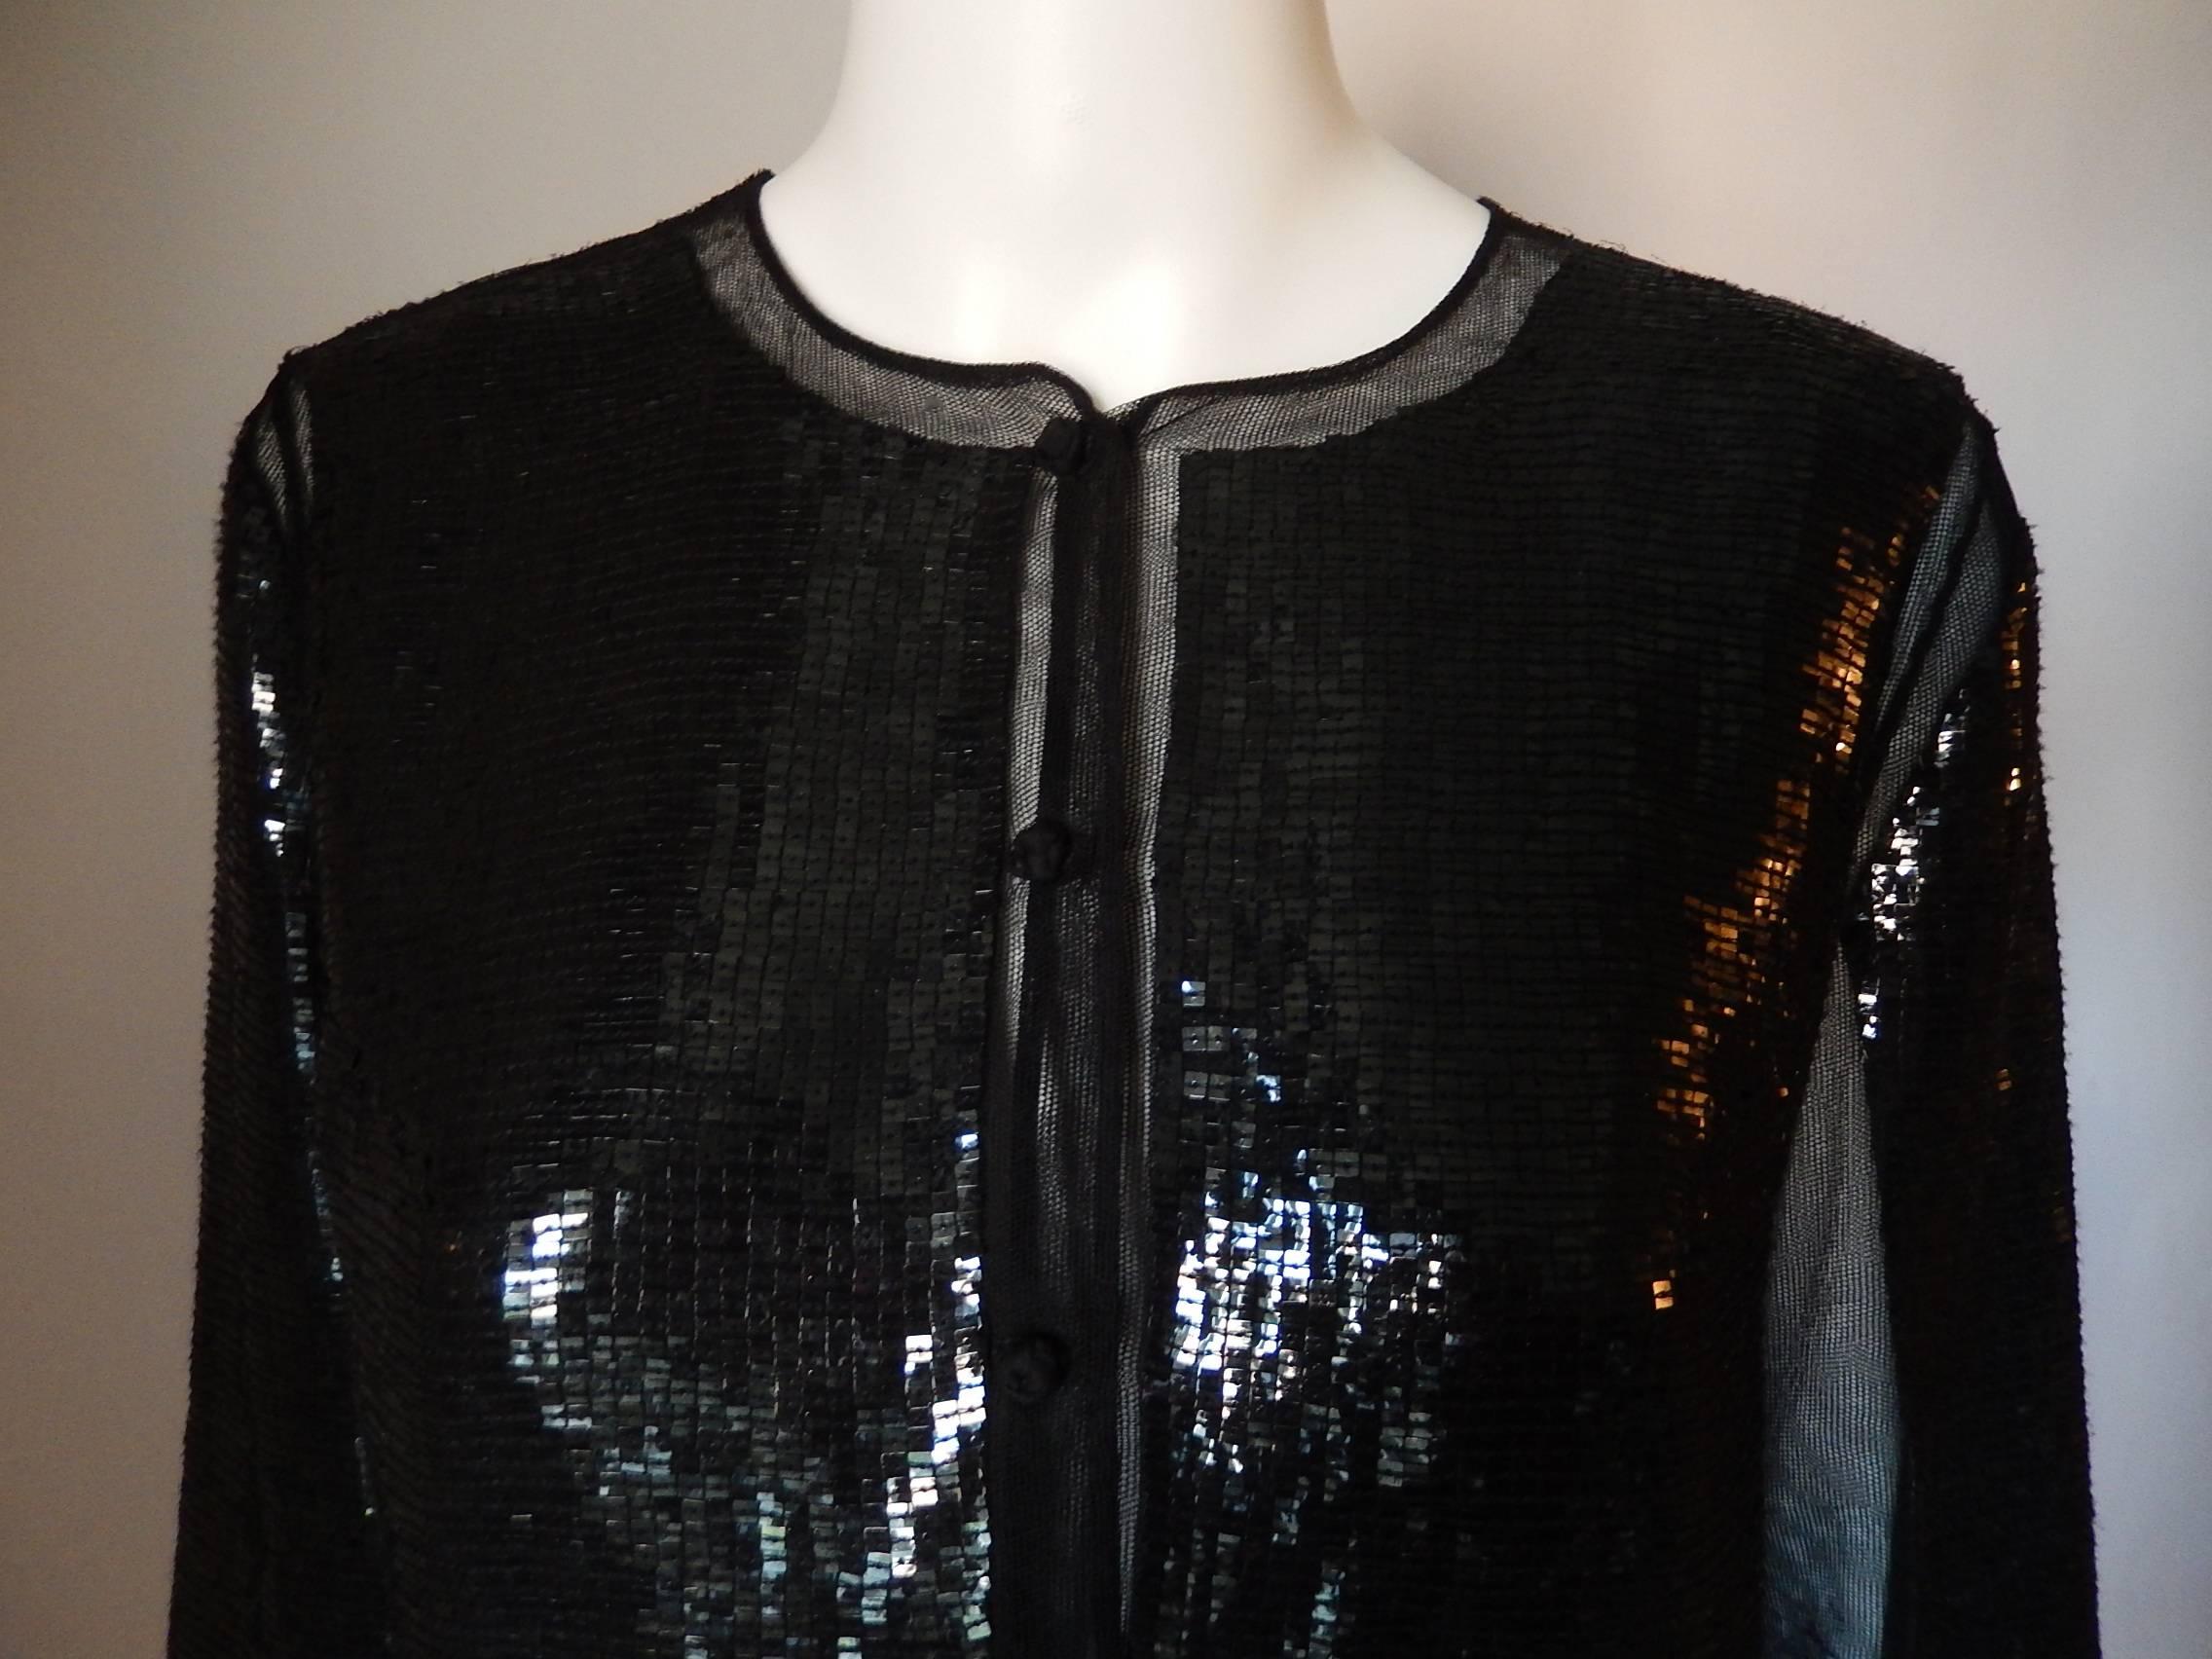 Chado Ralph Rucci all hand sewn black sequin cardigan.

Detail work with two front pockets and signature buttons down the front

Impossible to describe beauty

Size Tag reads 8:
Bust:  39